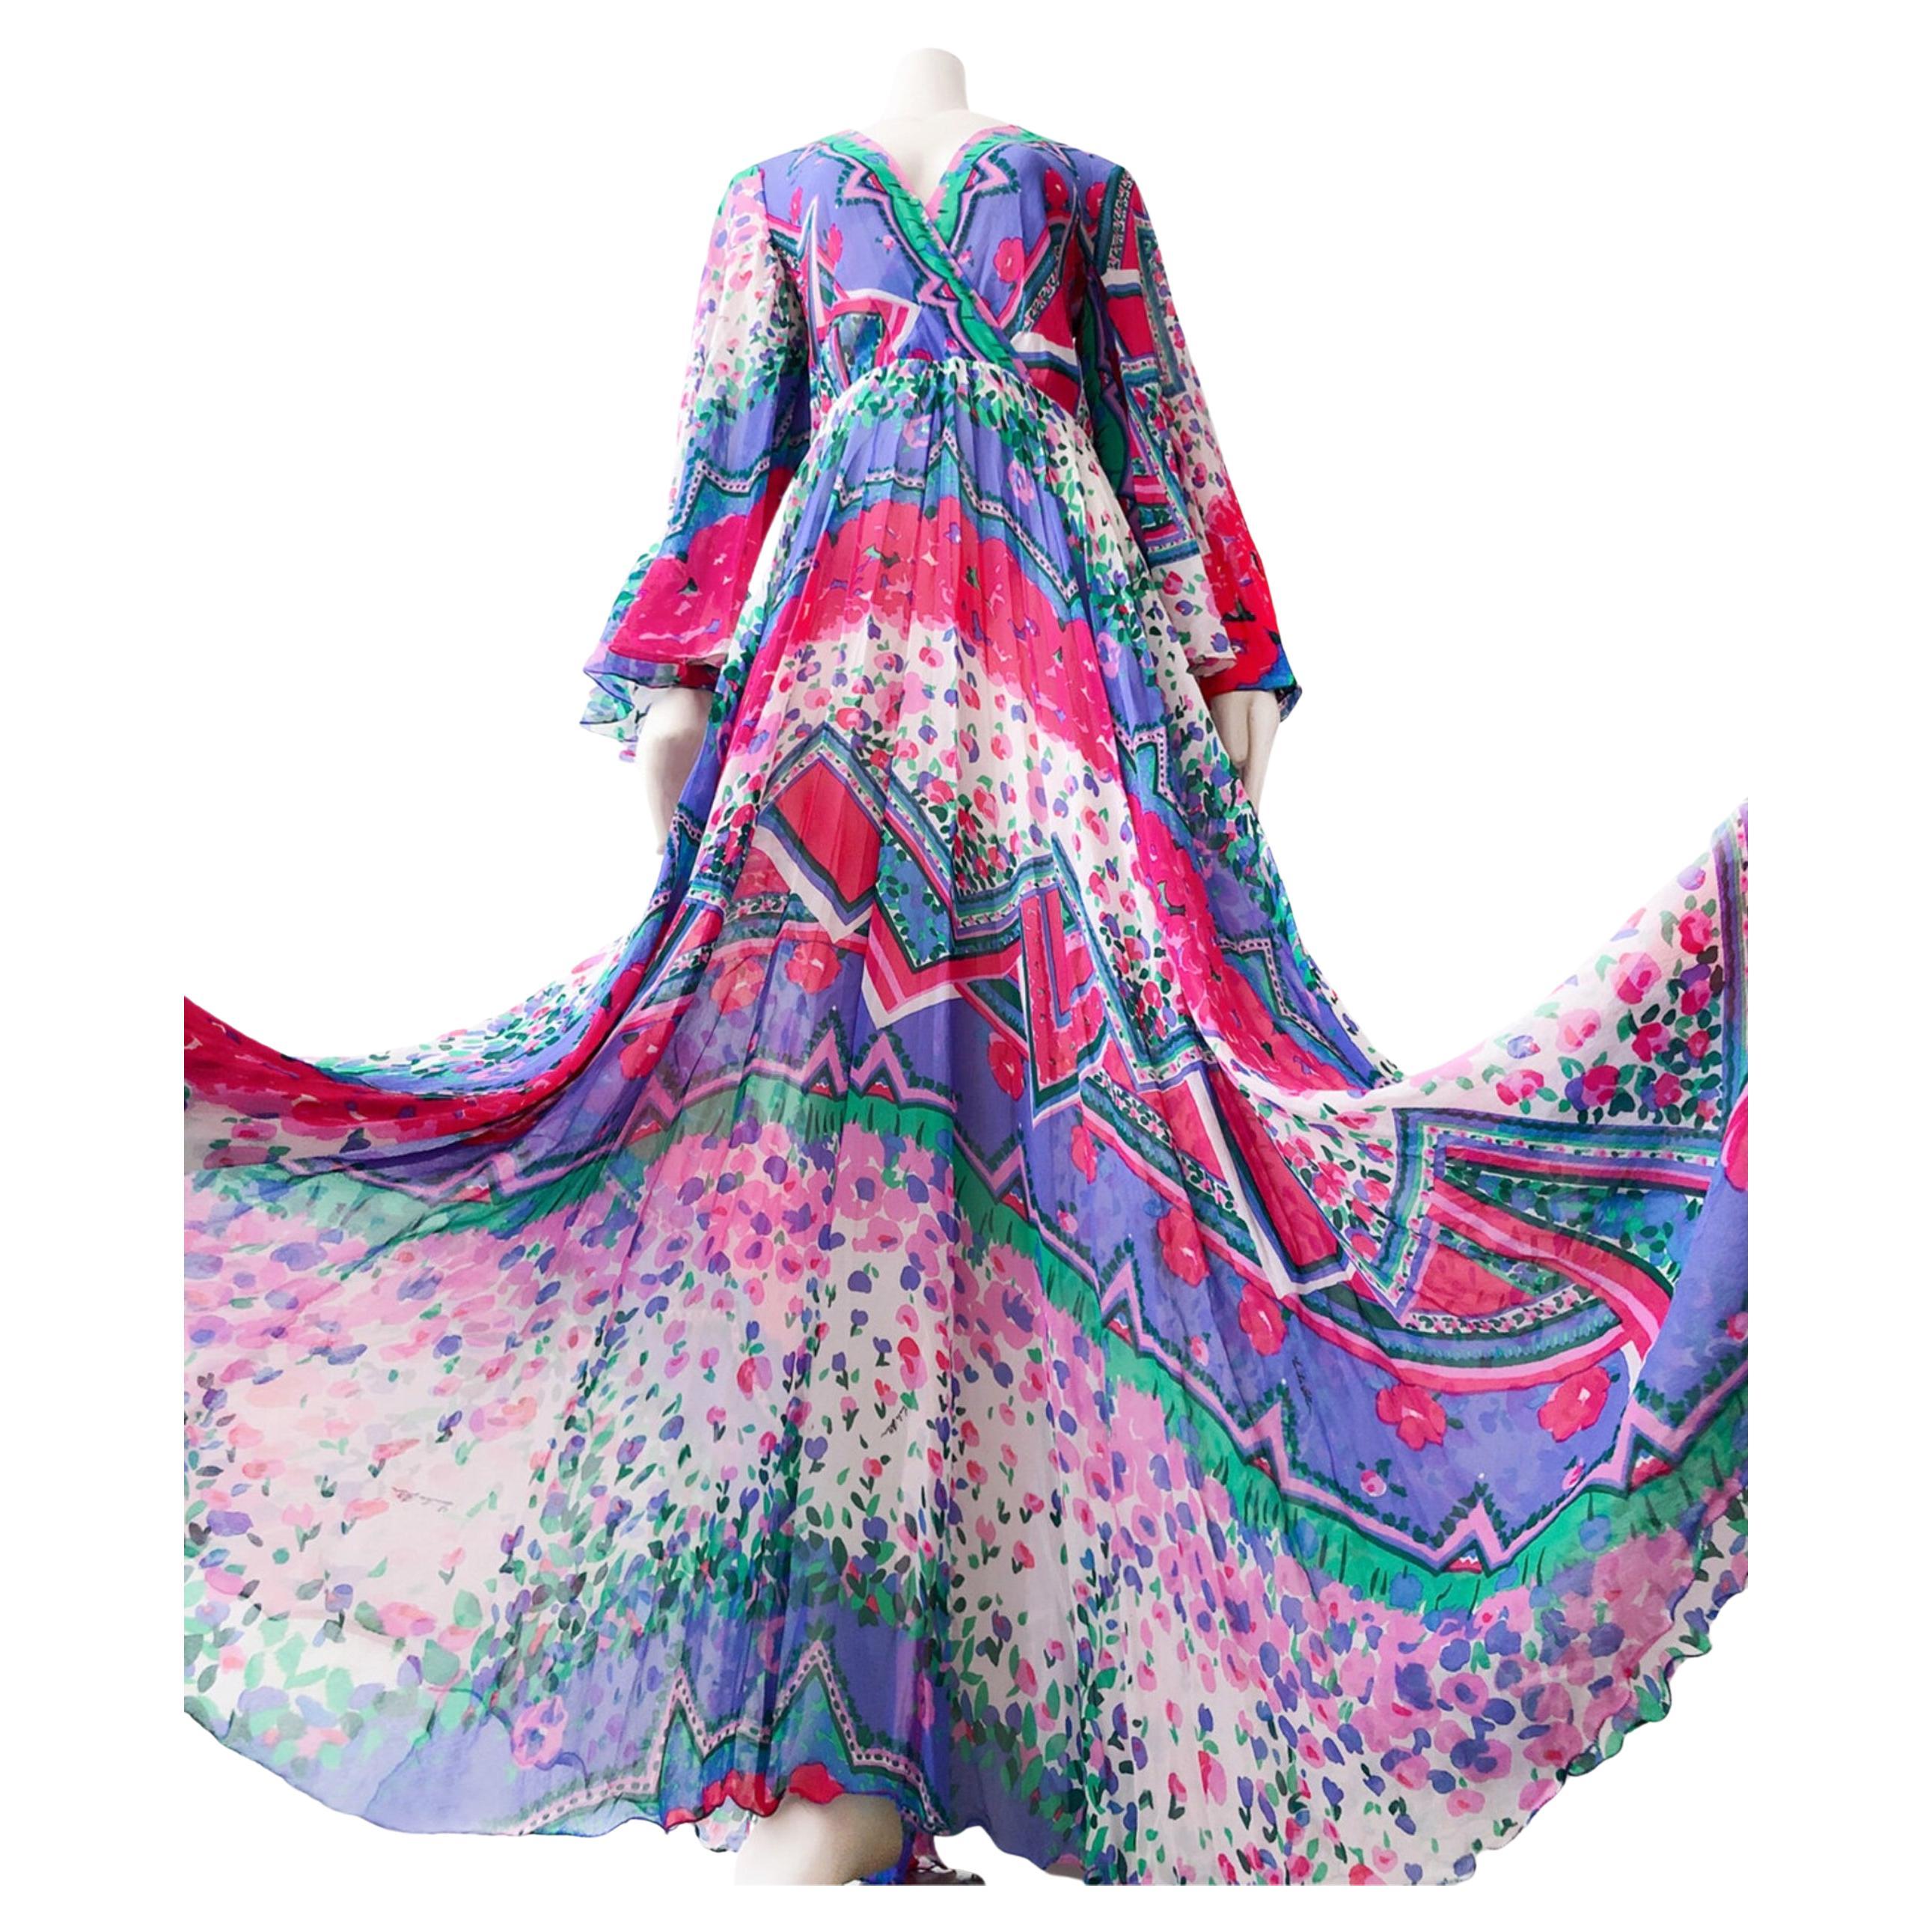 
Amazing Vintage Emilia Bellini ca.1960's signature print pure Silk maxi dress. High quality very rare vintage designer gown.
The shape is really amazing - true goddess vibes. It is a long maxi gown with super wide skirt, the sleeves are angel